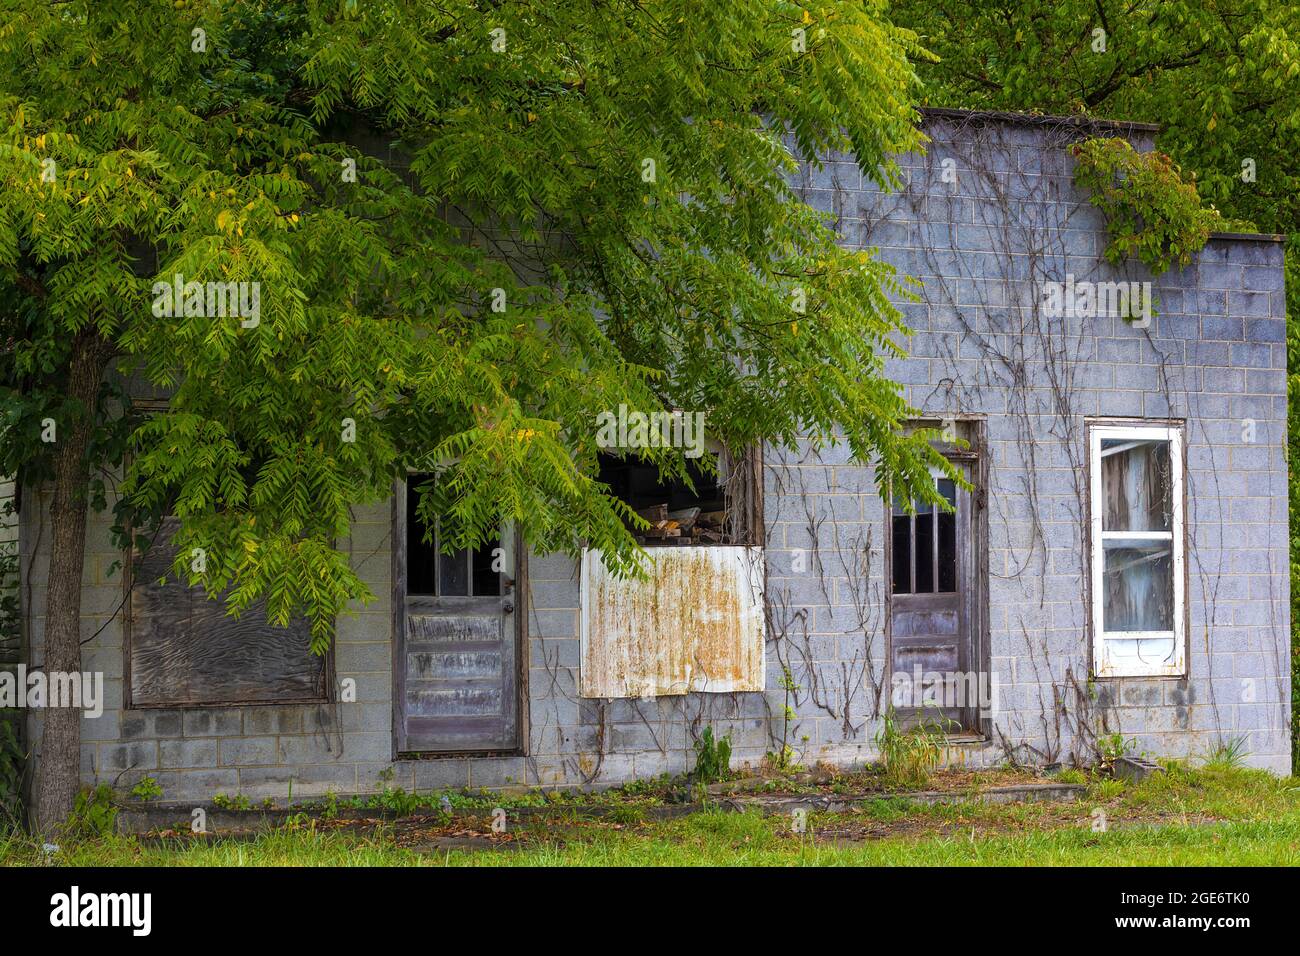 A possible old, abandoned business building along a country highway in rural Virginia. Stock Photo